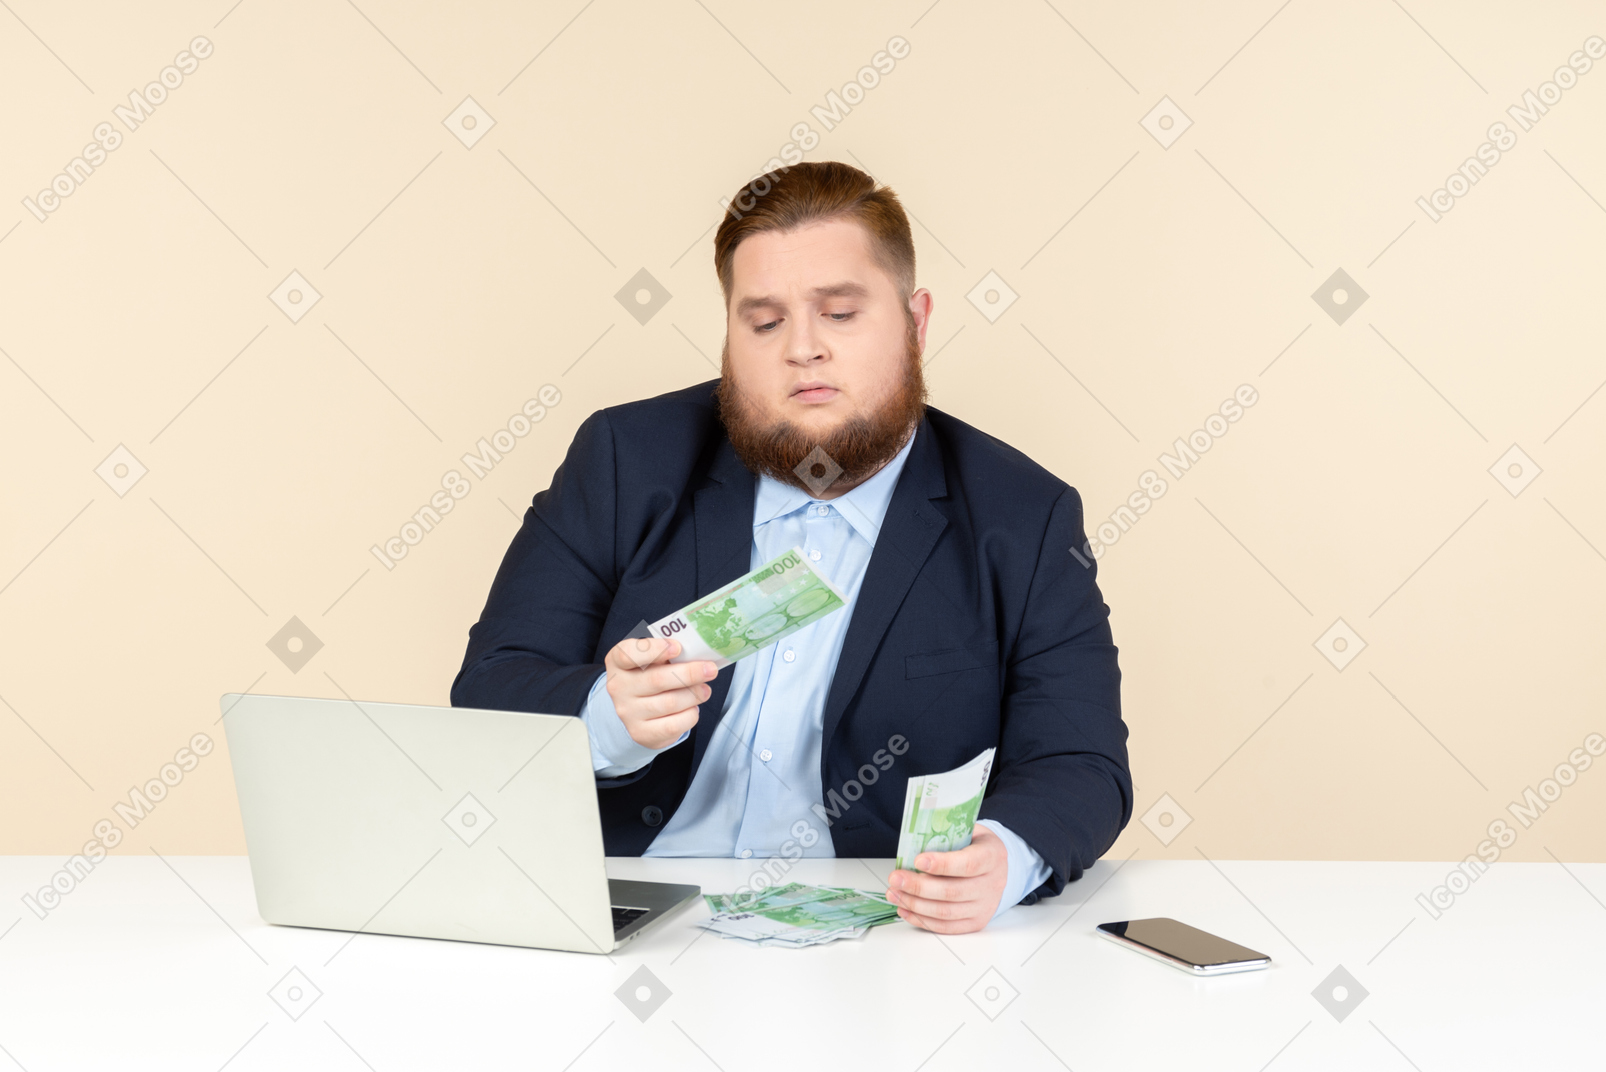 Young overweight man making sure money bills are real ones